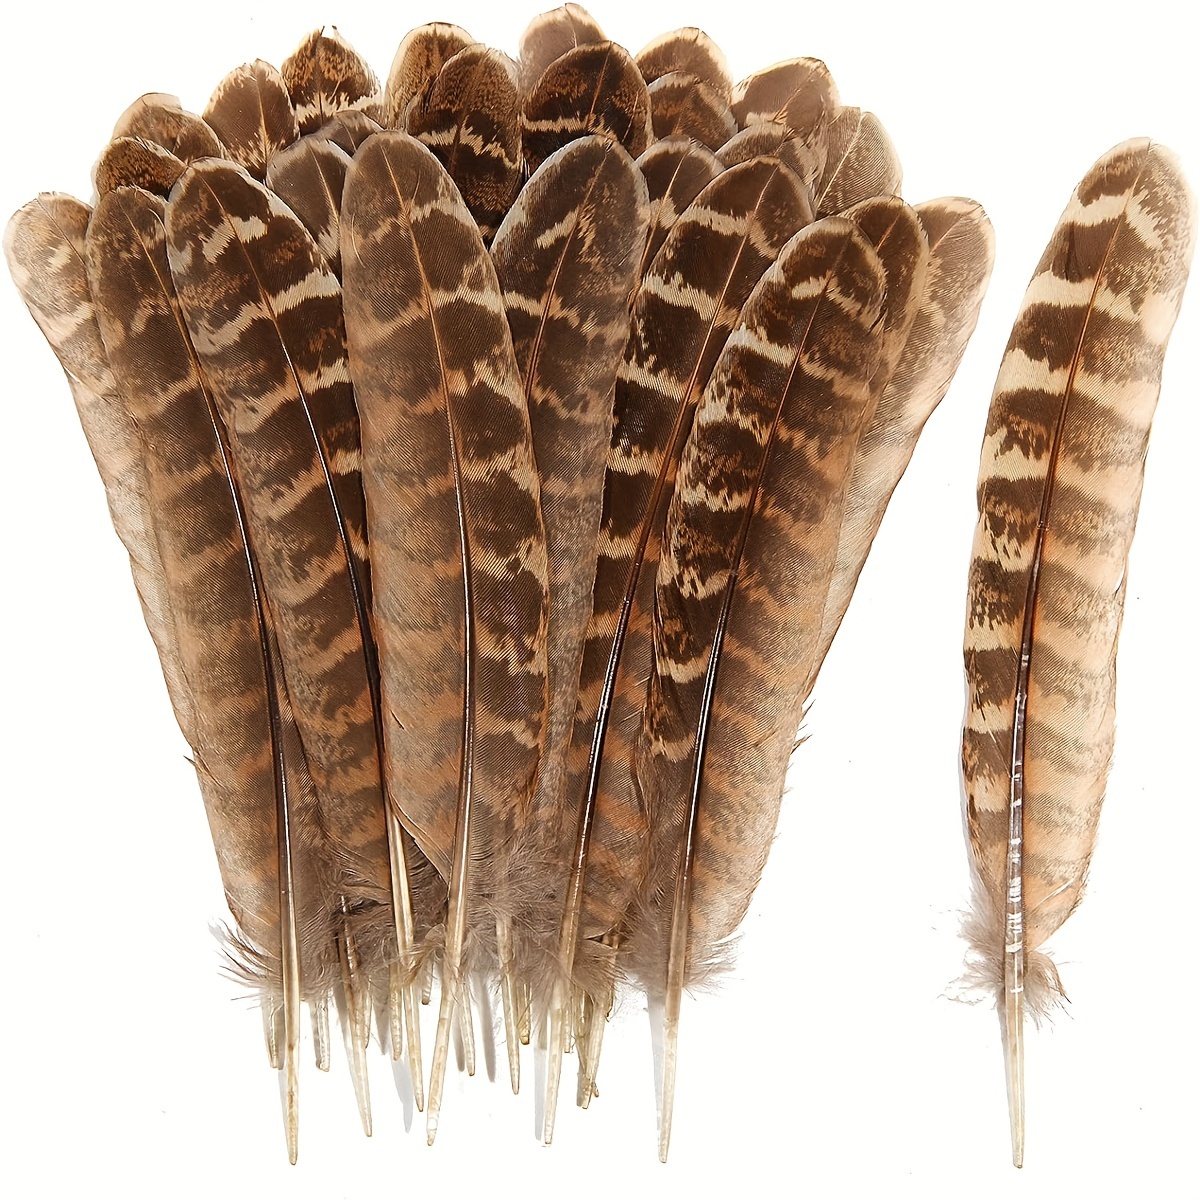 40pcs Natural Pheasant Feathers, Spotted Feathers, Turkey Feathers, 4  Styles 